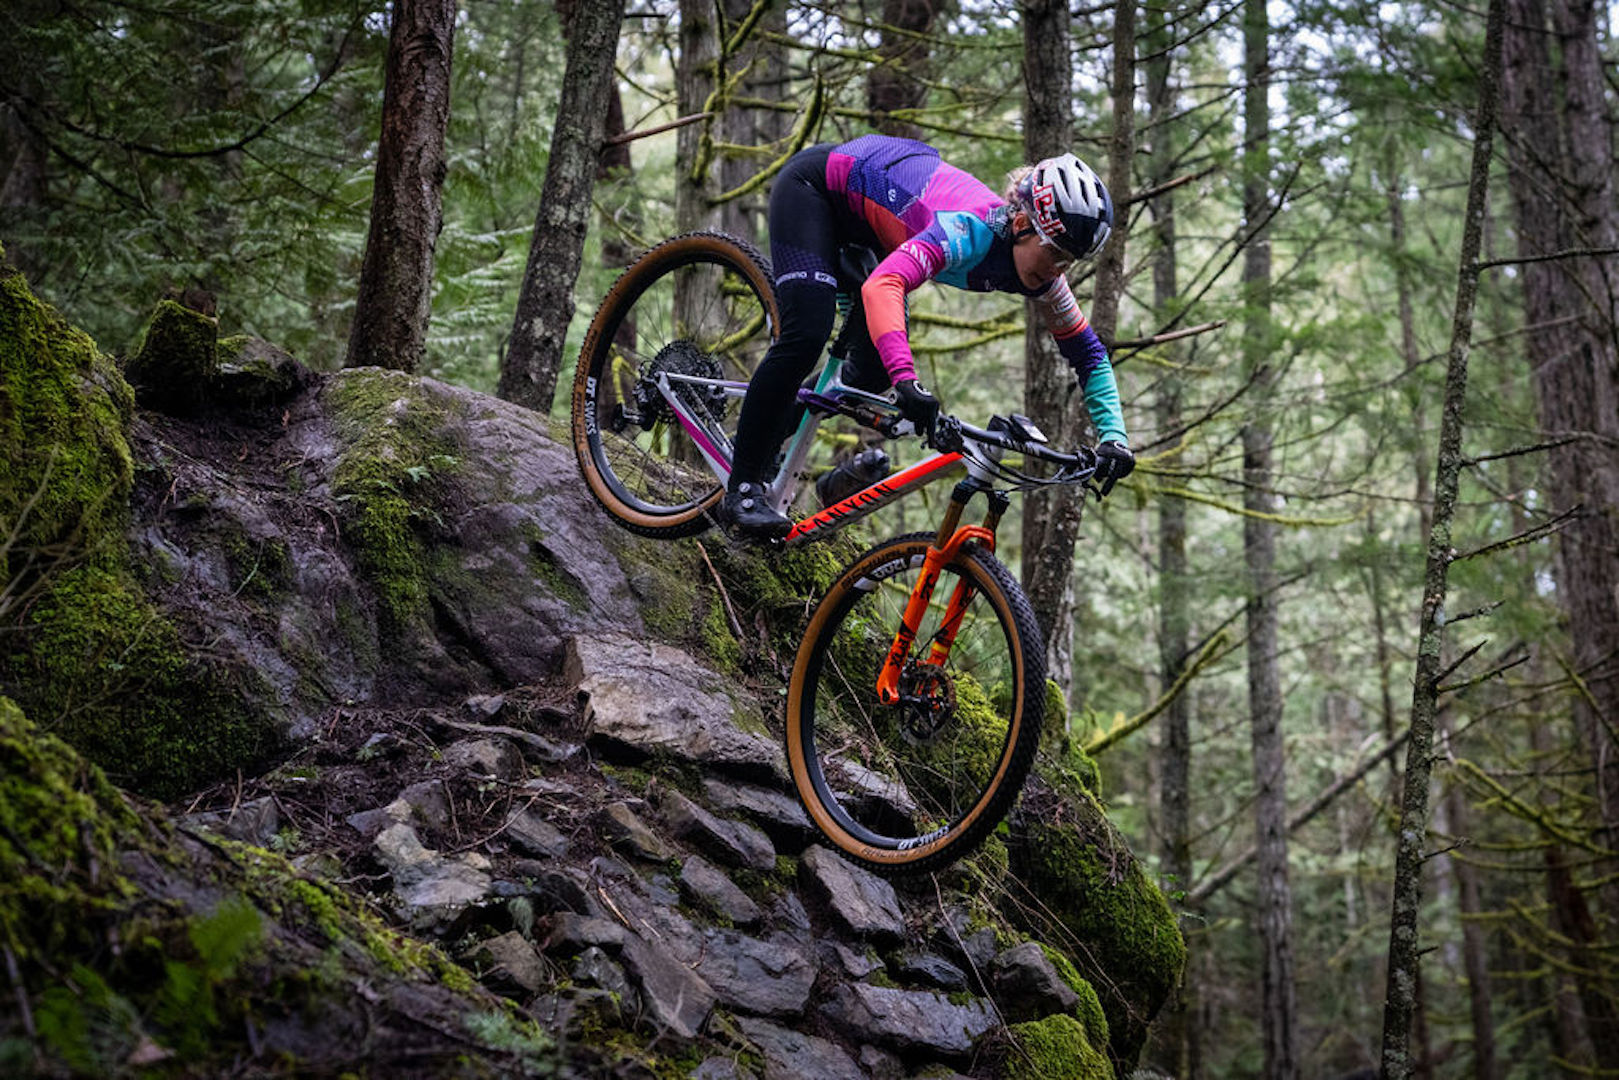 Emily Batty riding her bike down a steep rock section